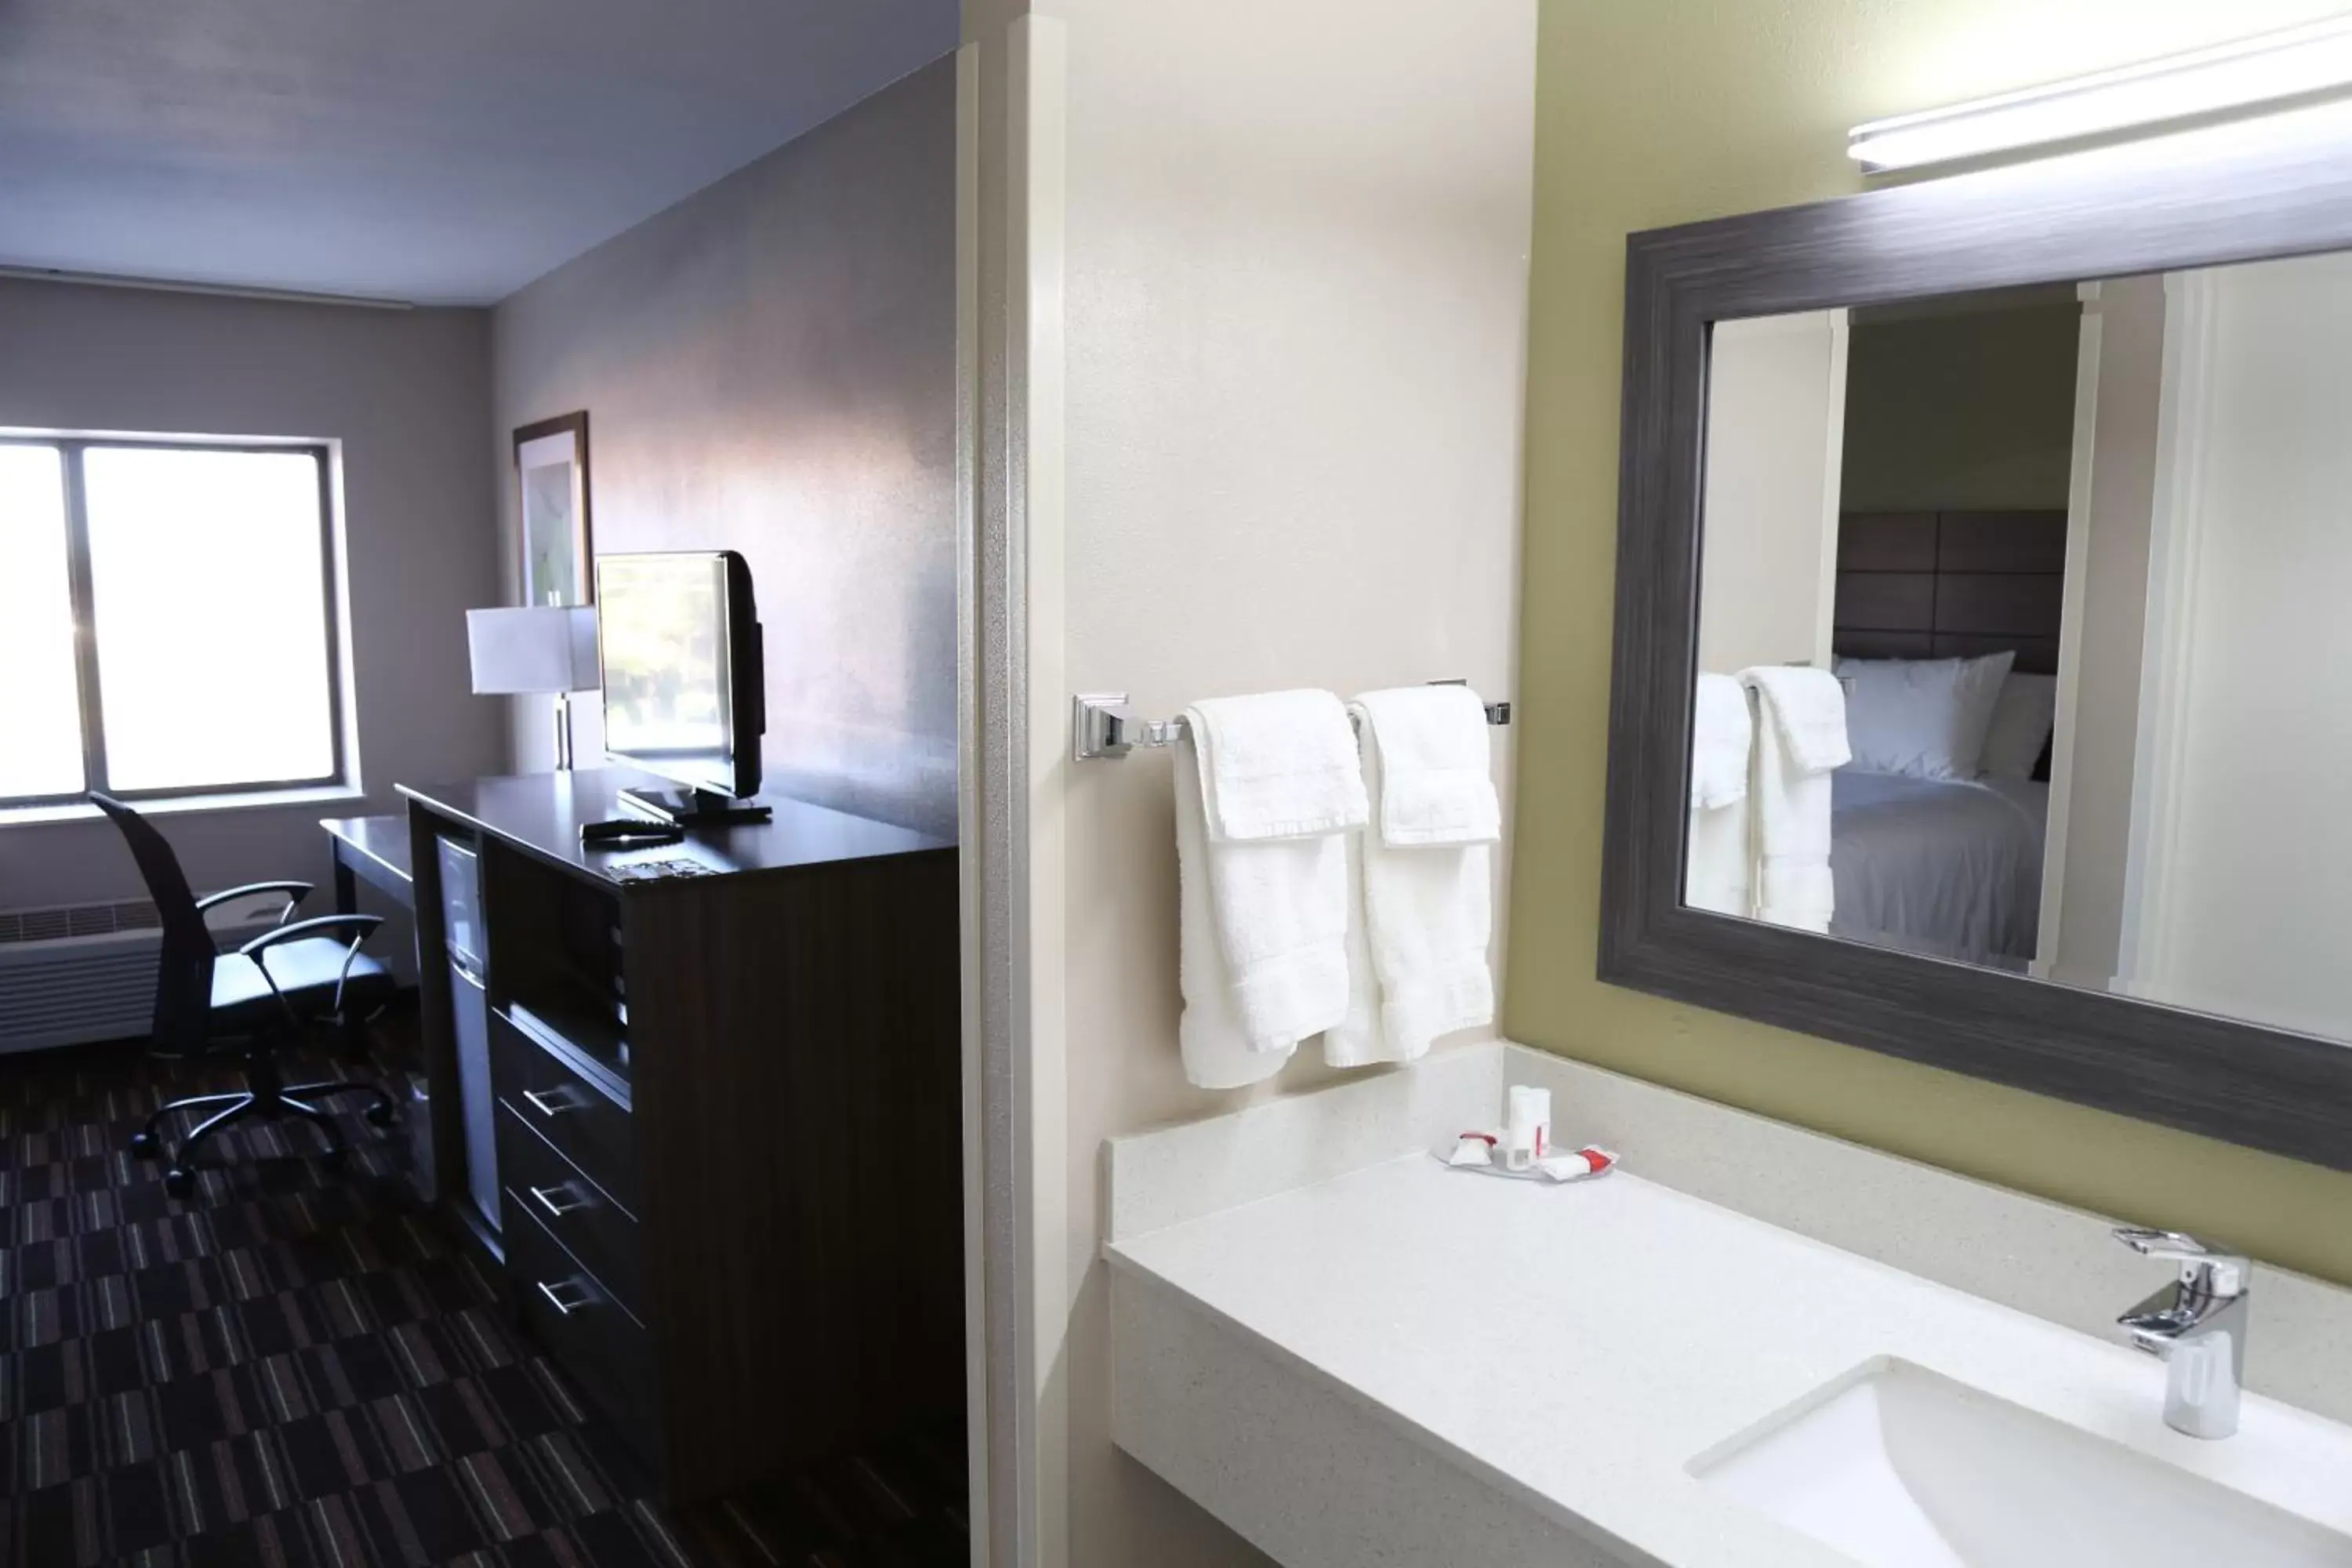 Area and facilities, Bathroom in Baymont by Wyndham Plano